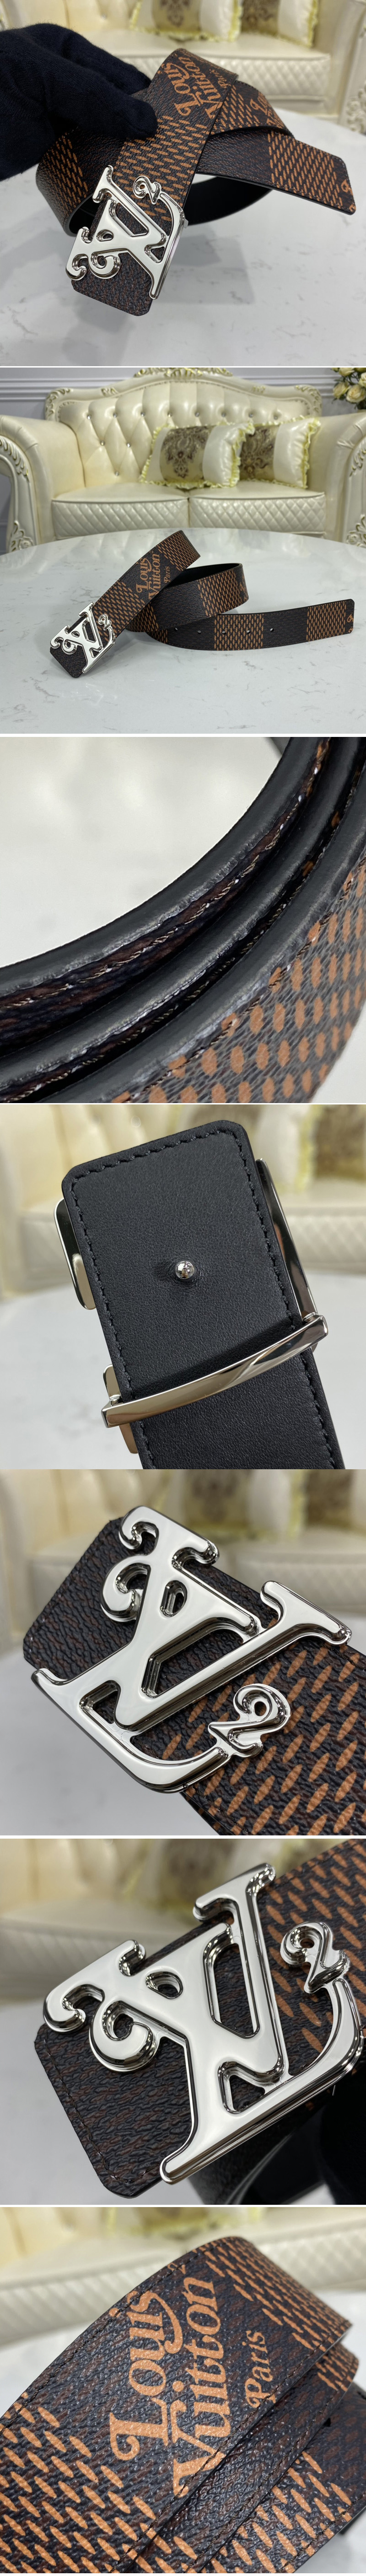 Replica Louis Vuitton MP254V LV Squared LV 40mm reversible belt in Ebene/Black With Silver Buckle